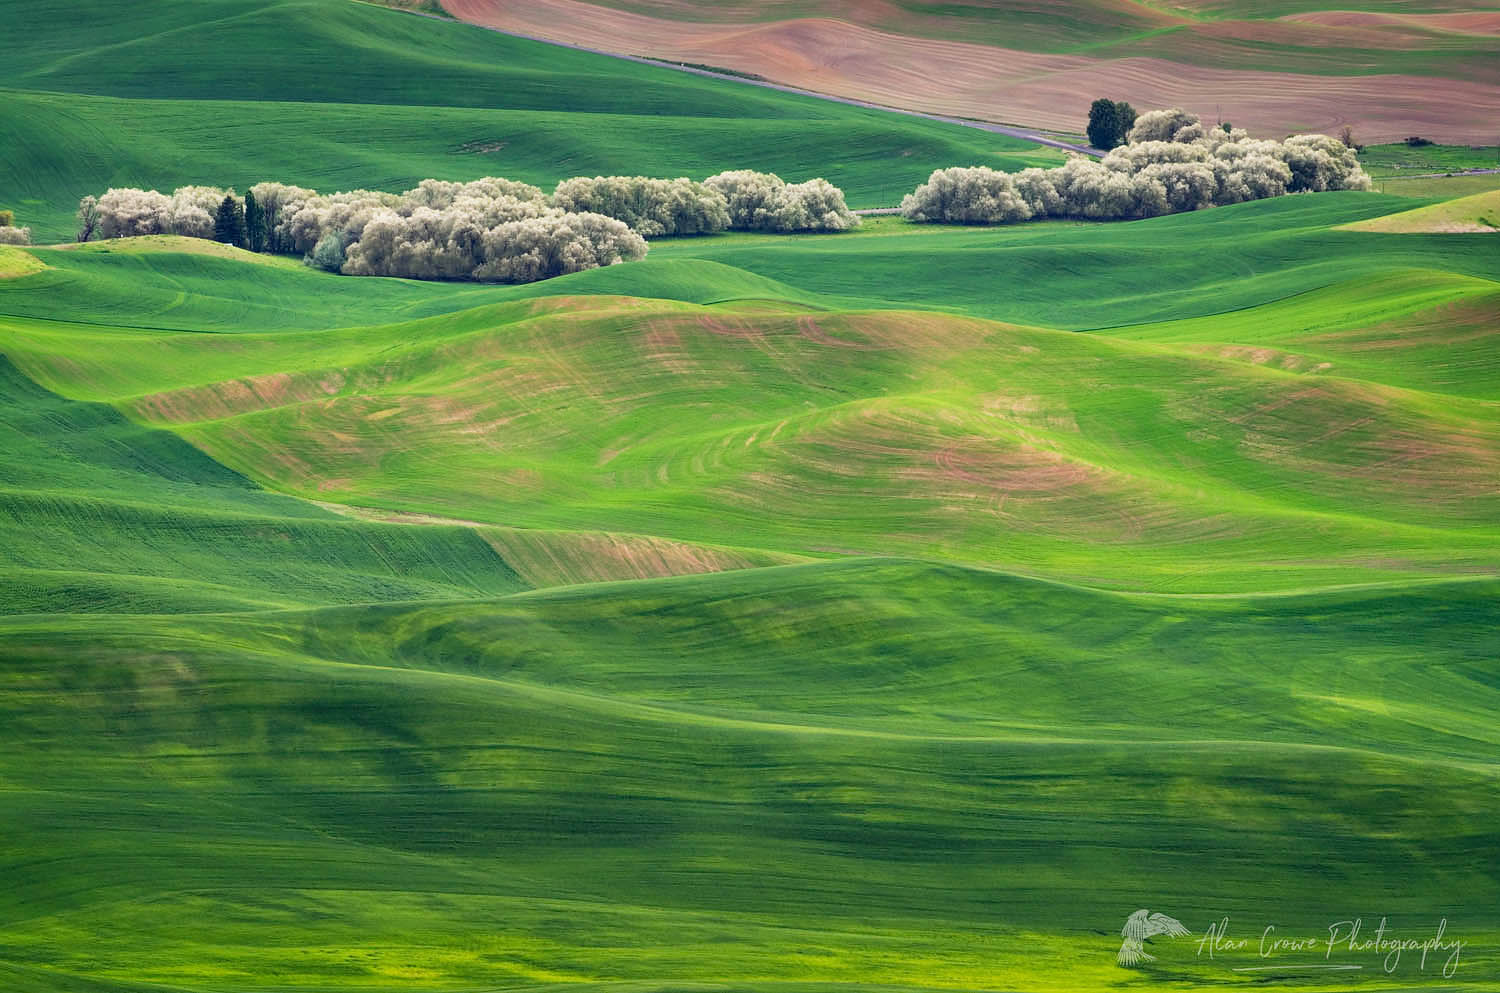 Rolling hills of green wheat fields seen from Steptoe Butte, the Palouse region of the Inland Empire of Washington #51644